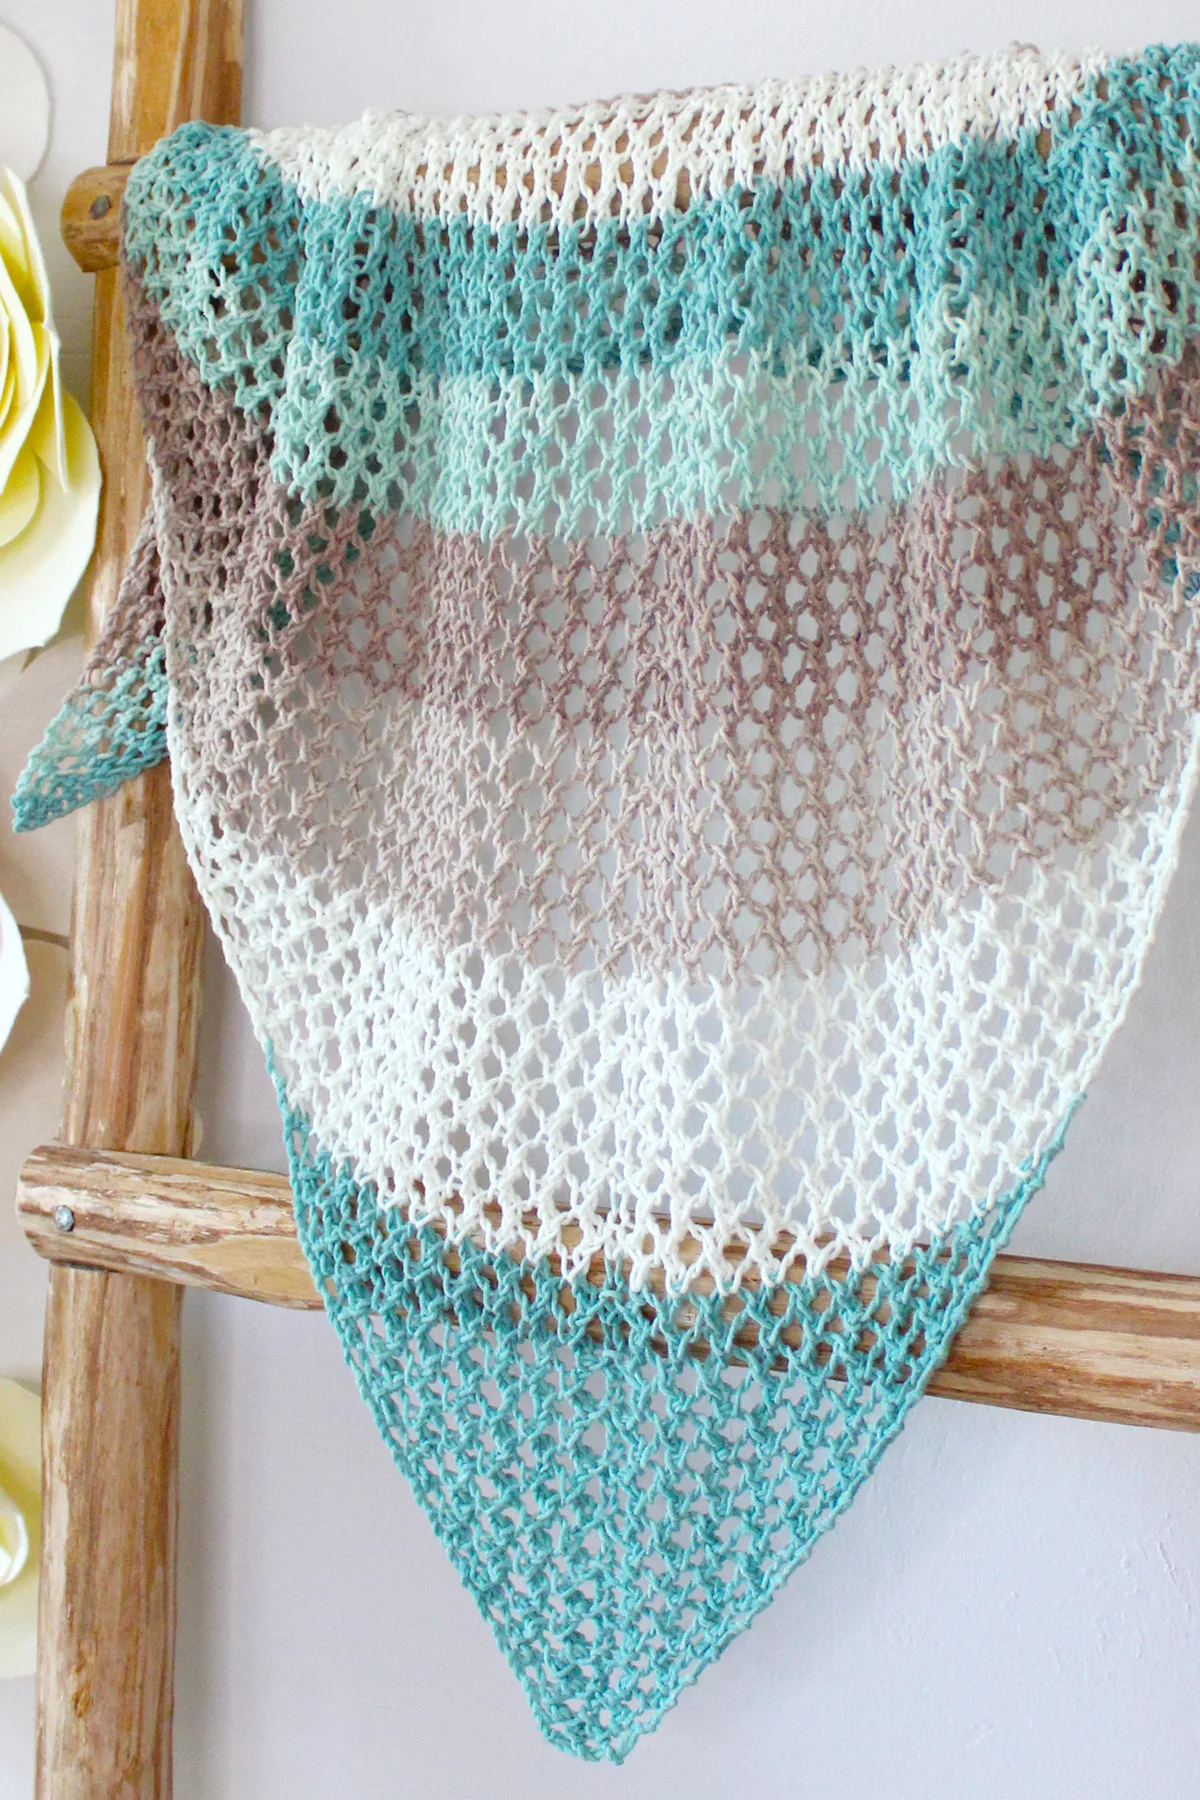 Mesh knitted shawl in multicolors displayed on a wooden blanket ladder.